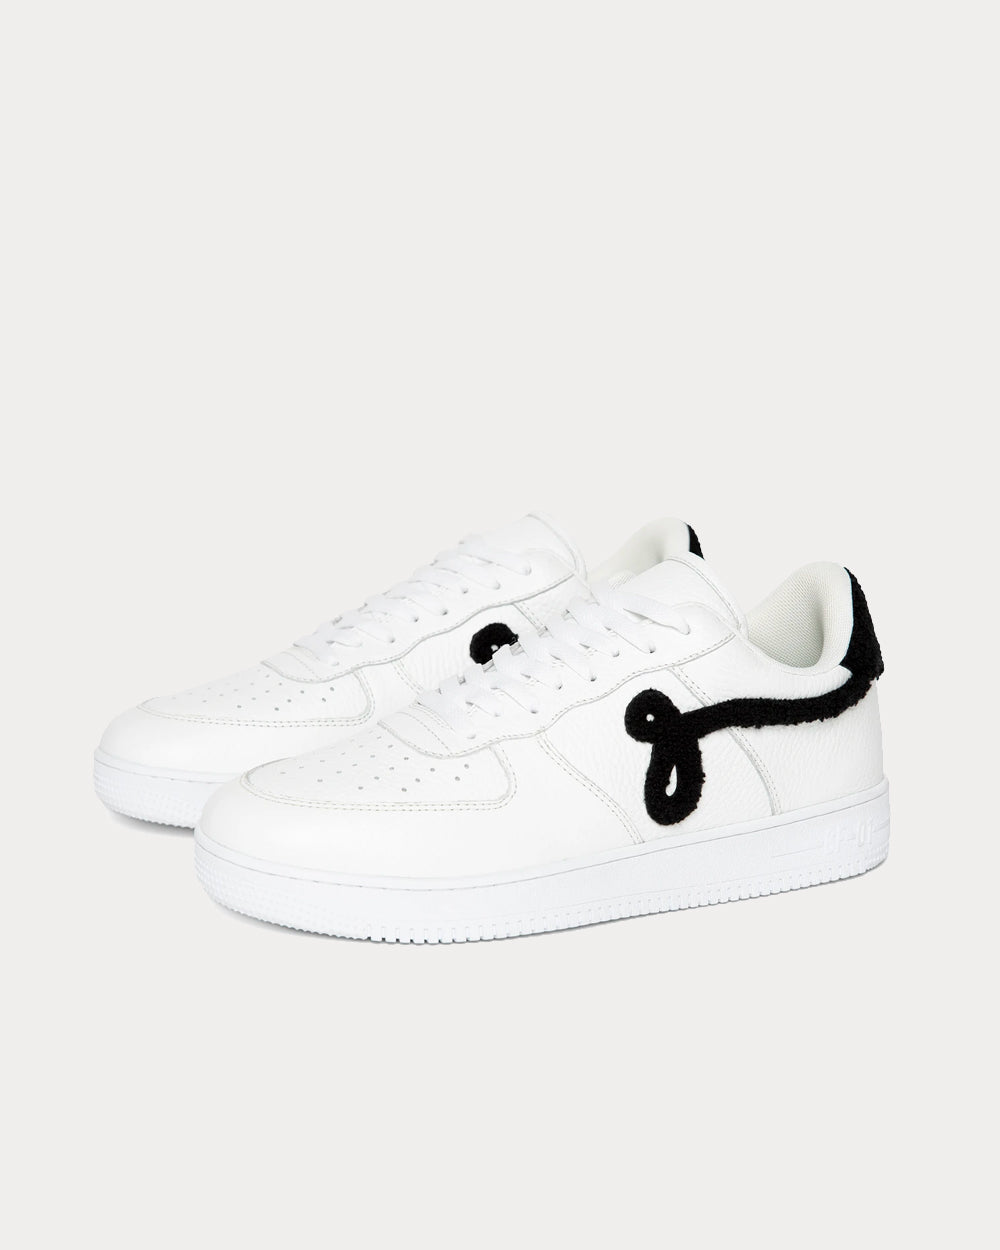 John Geiger - GF-01 'White Pebbled Leather Black Chenille' Low Top Sneakers